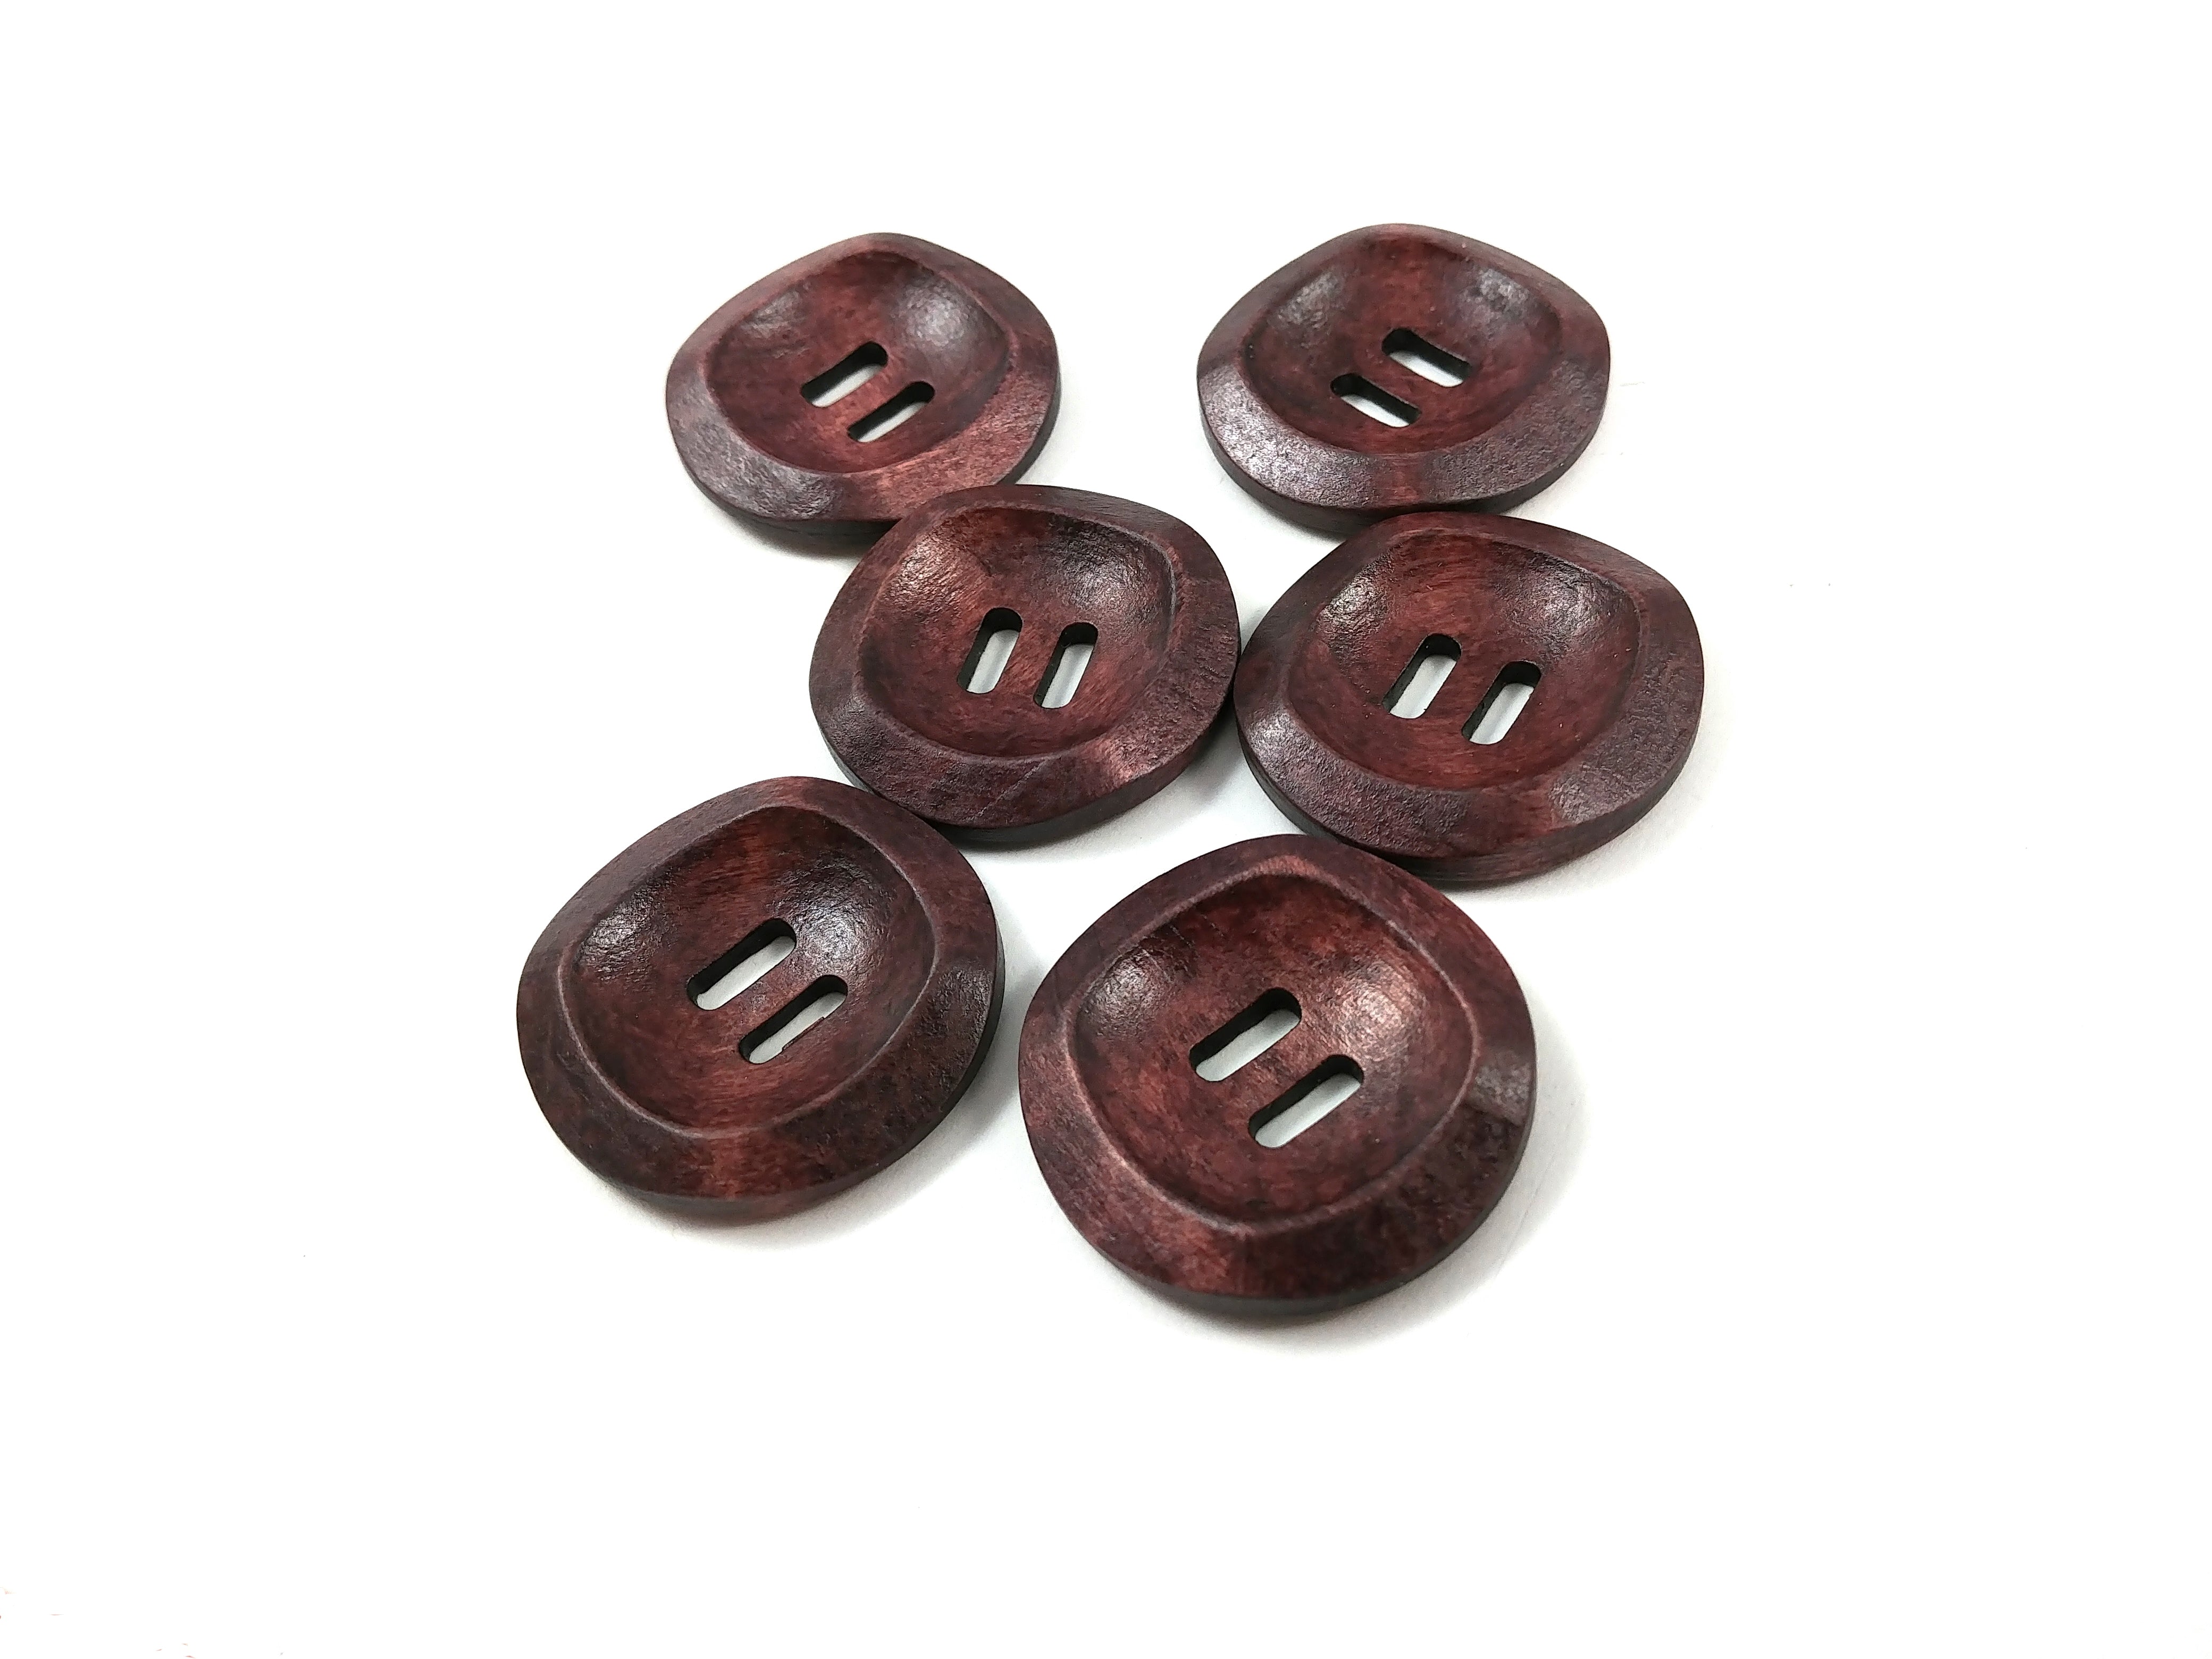 Midnight Red Buttons, 4 Hole Sewing/Crafts Buttons 15mm - 12 Pieces (008)